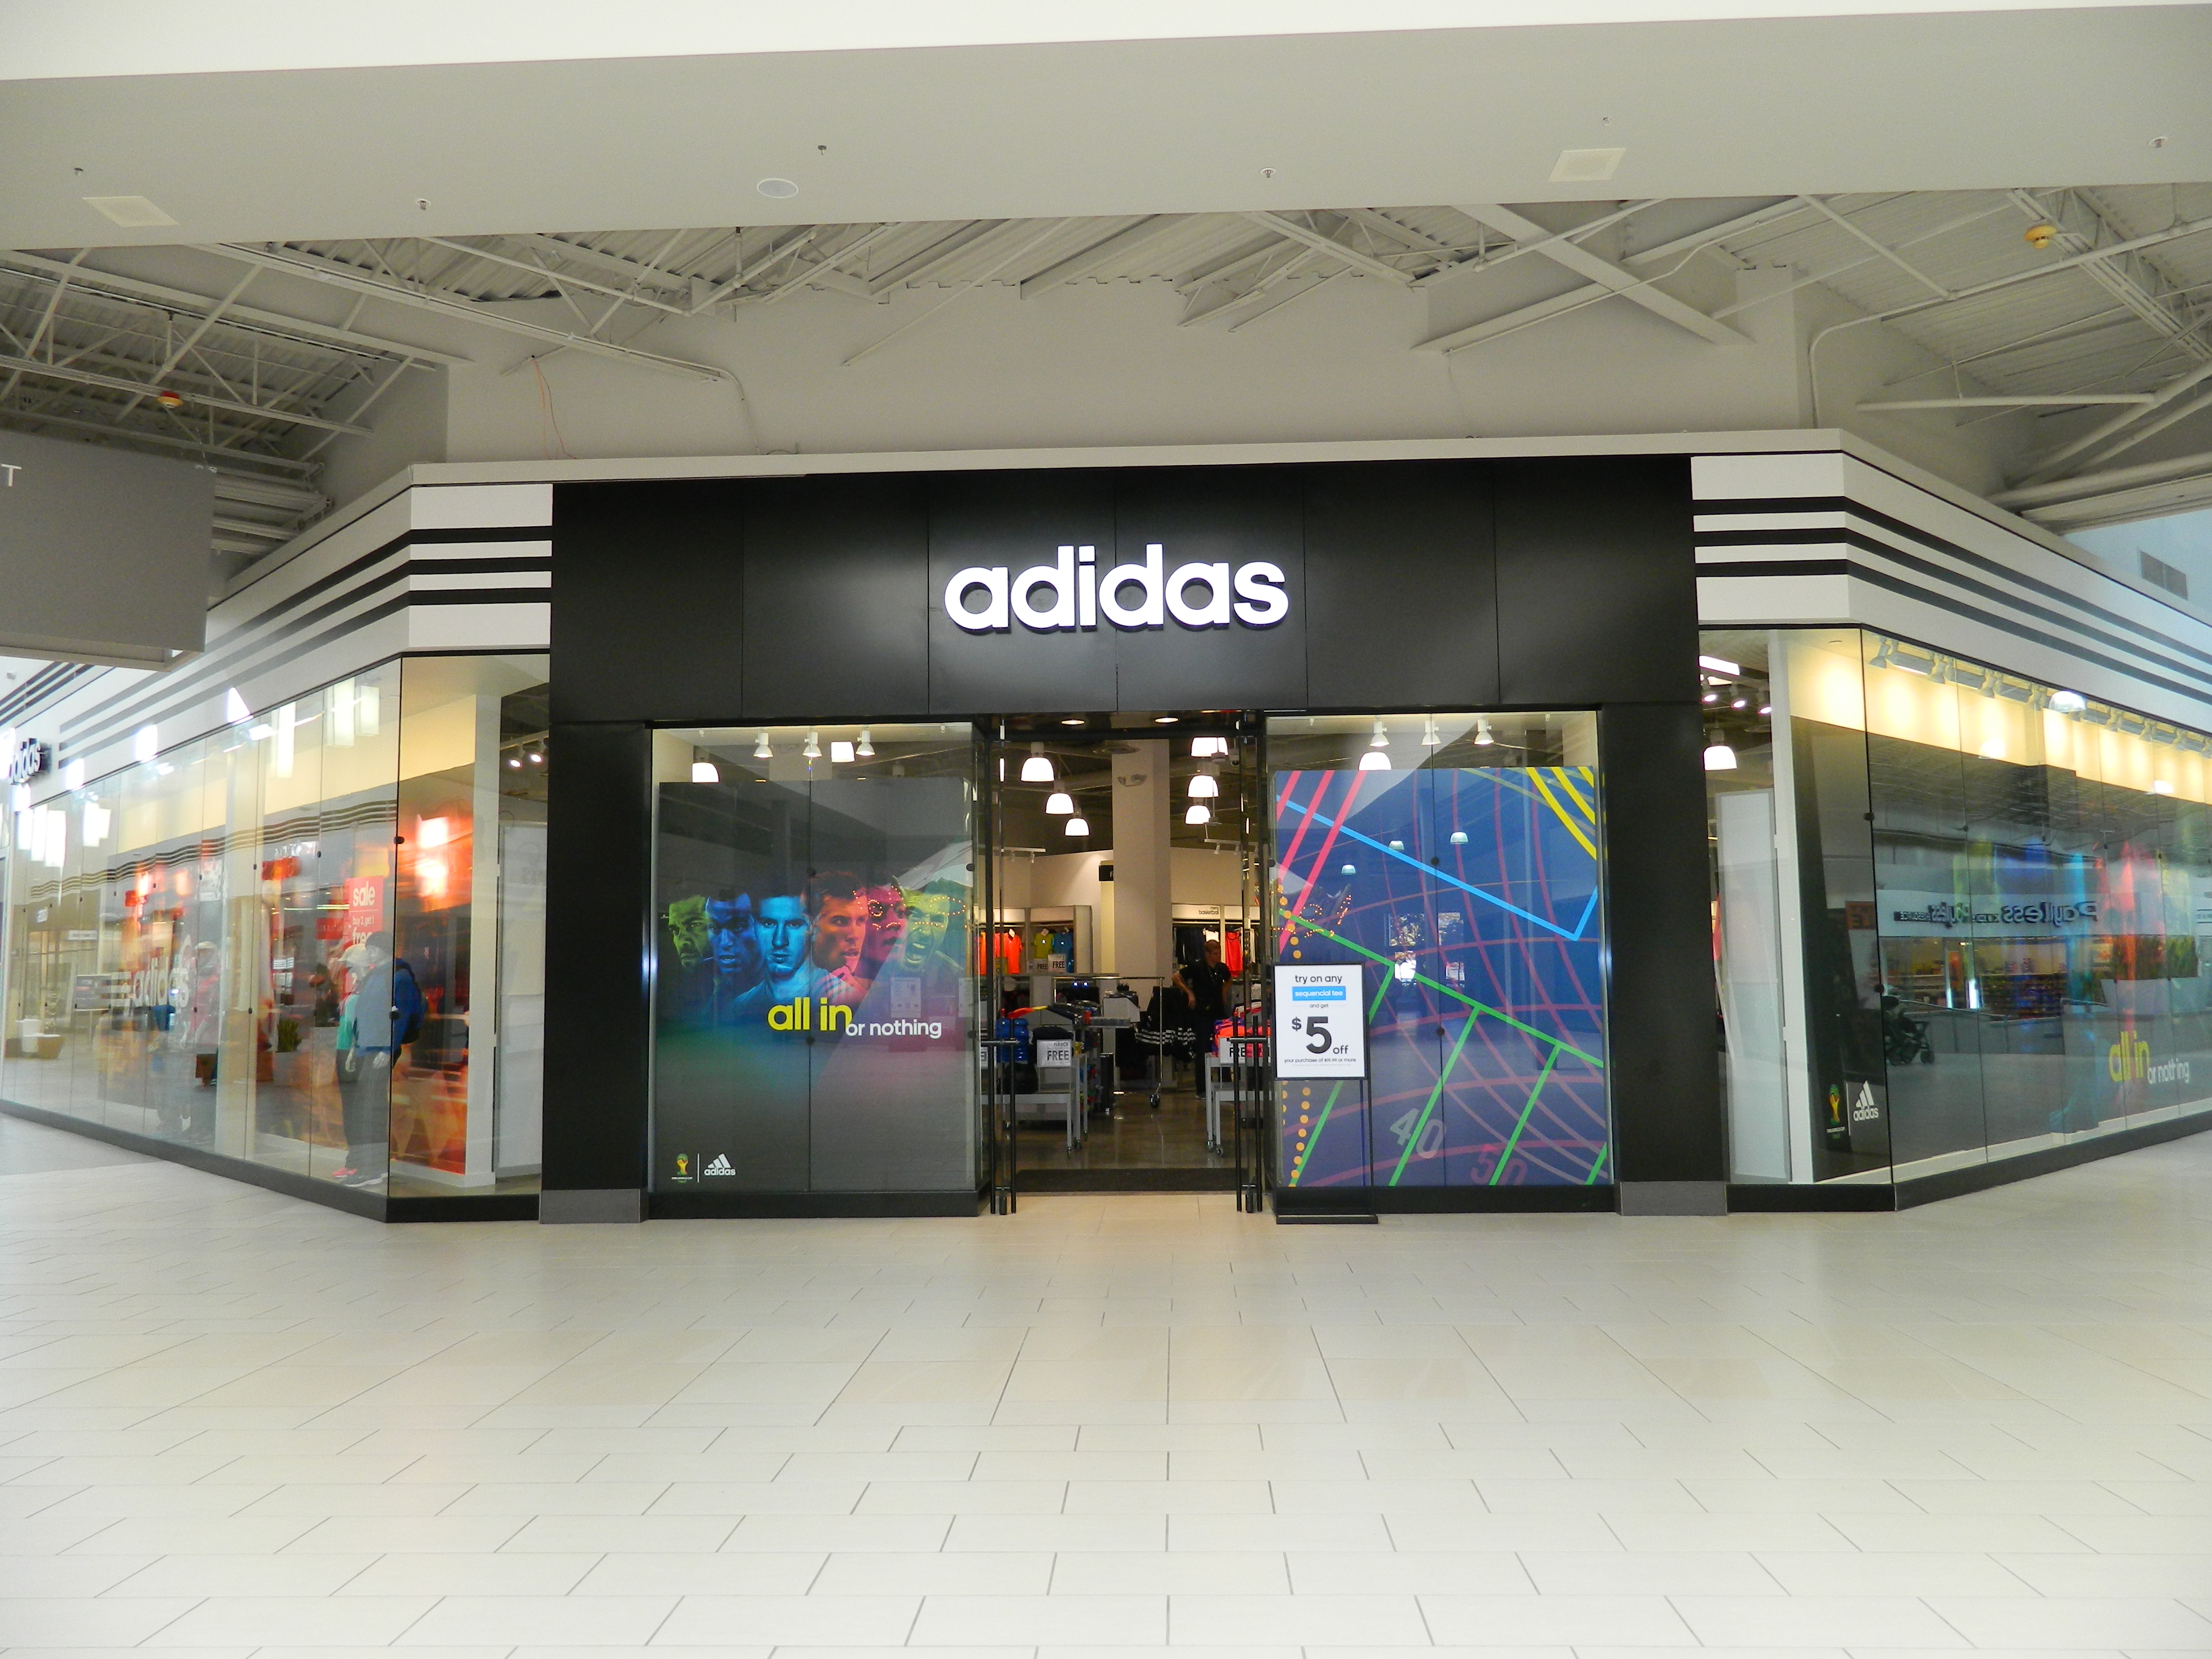 adidas store at the outlet mall